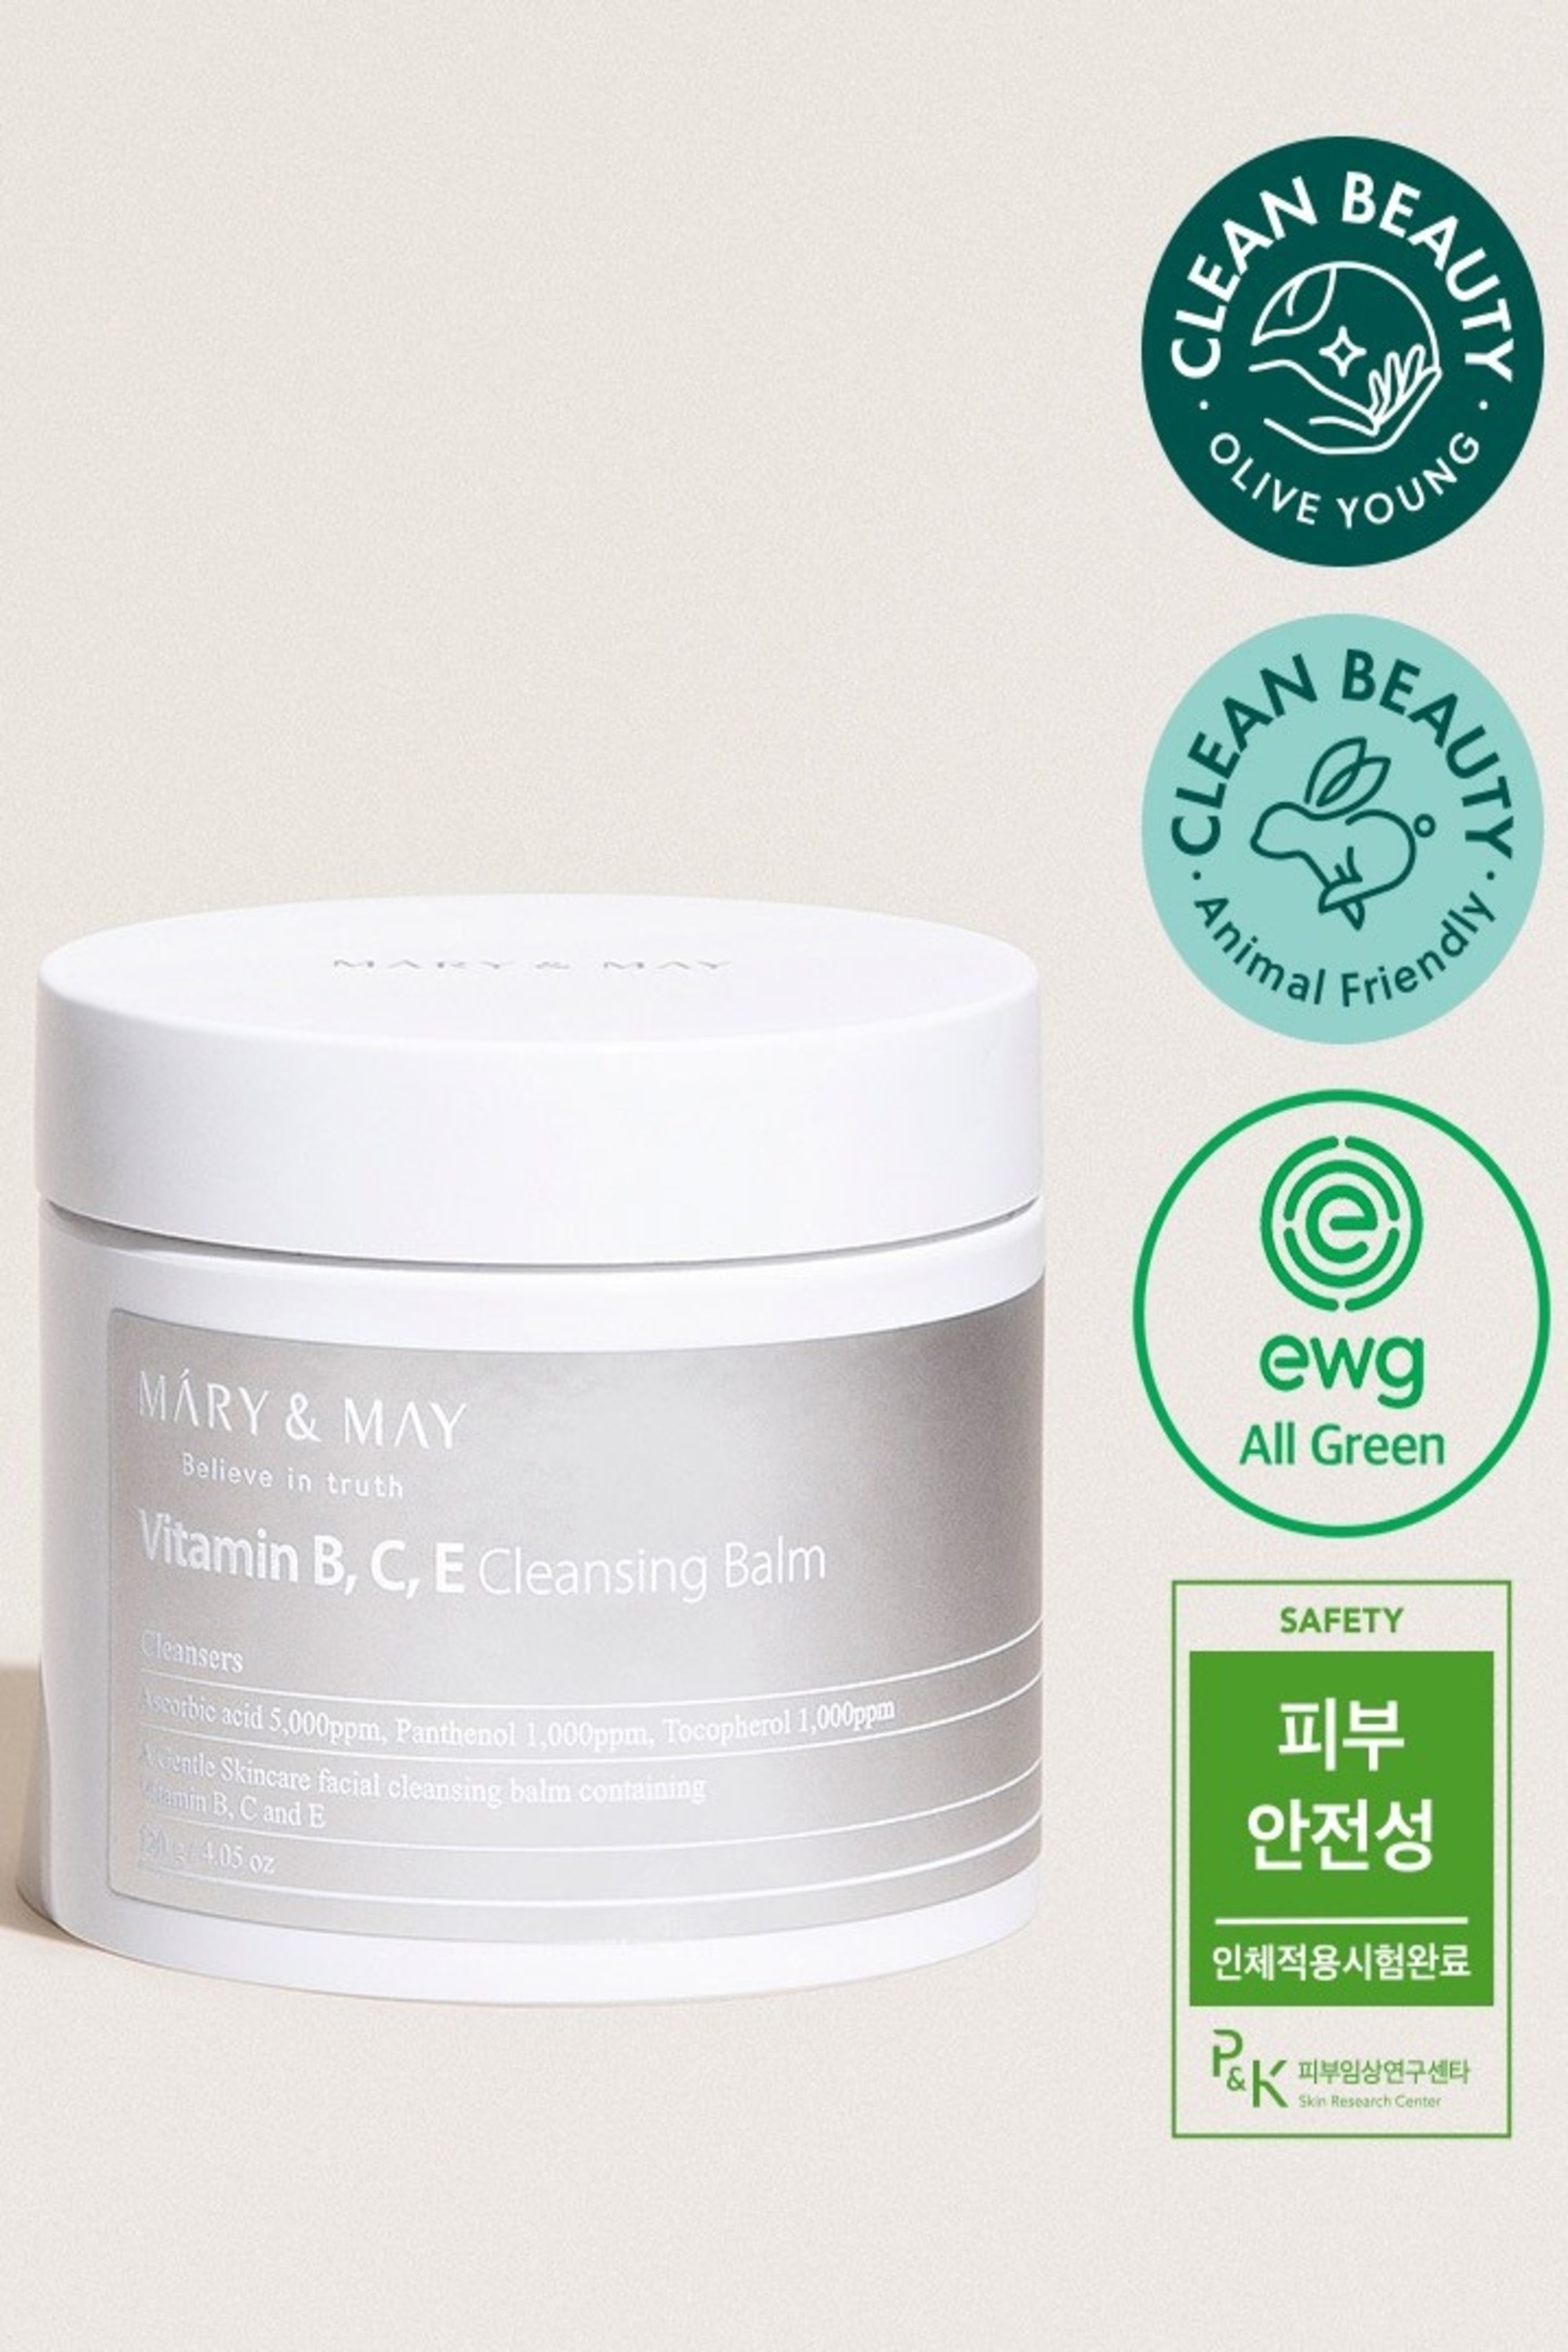  Mary&May Vitamine B.C.E Cleansing Balm 120g 